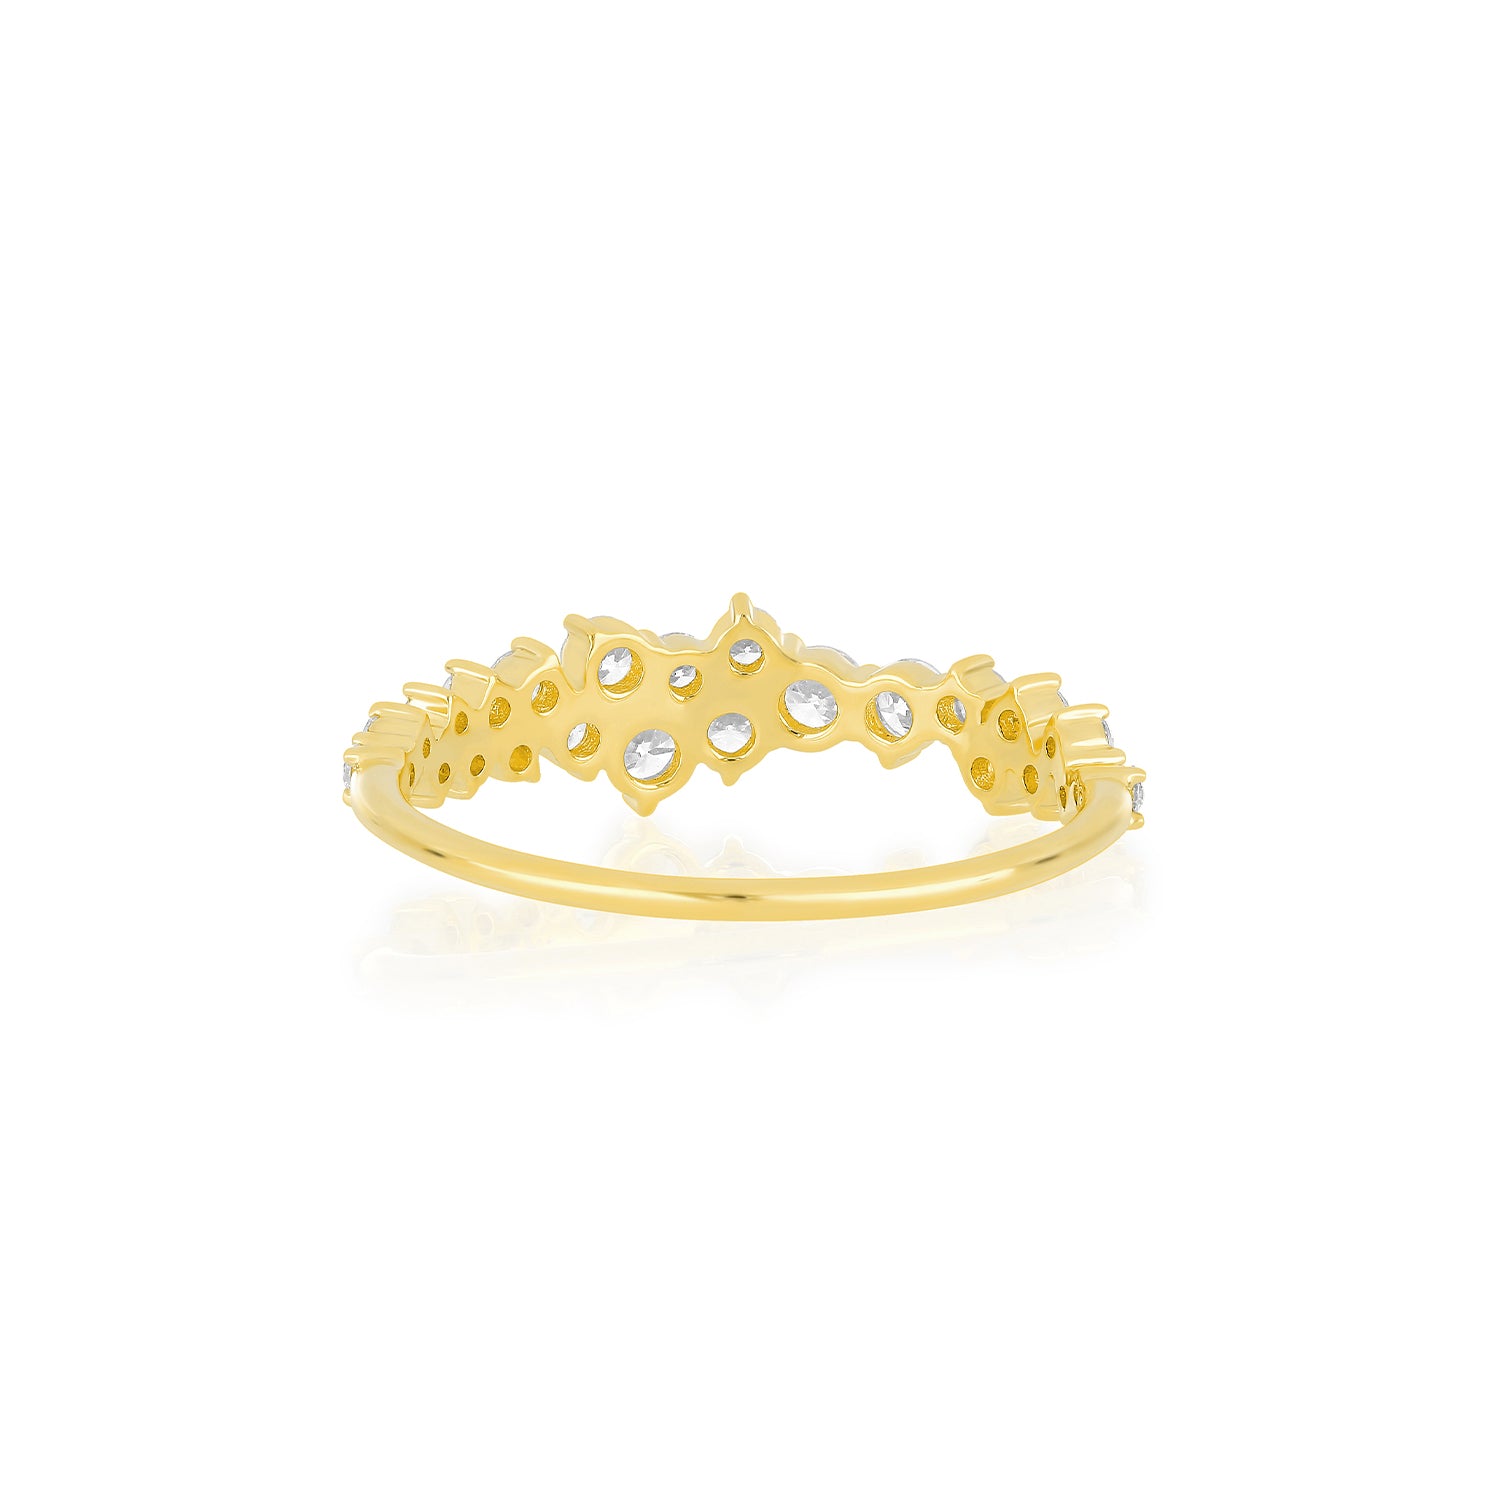 Diamond Cluster Ring in 14k yellow gold back side view